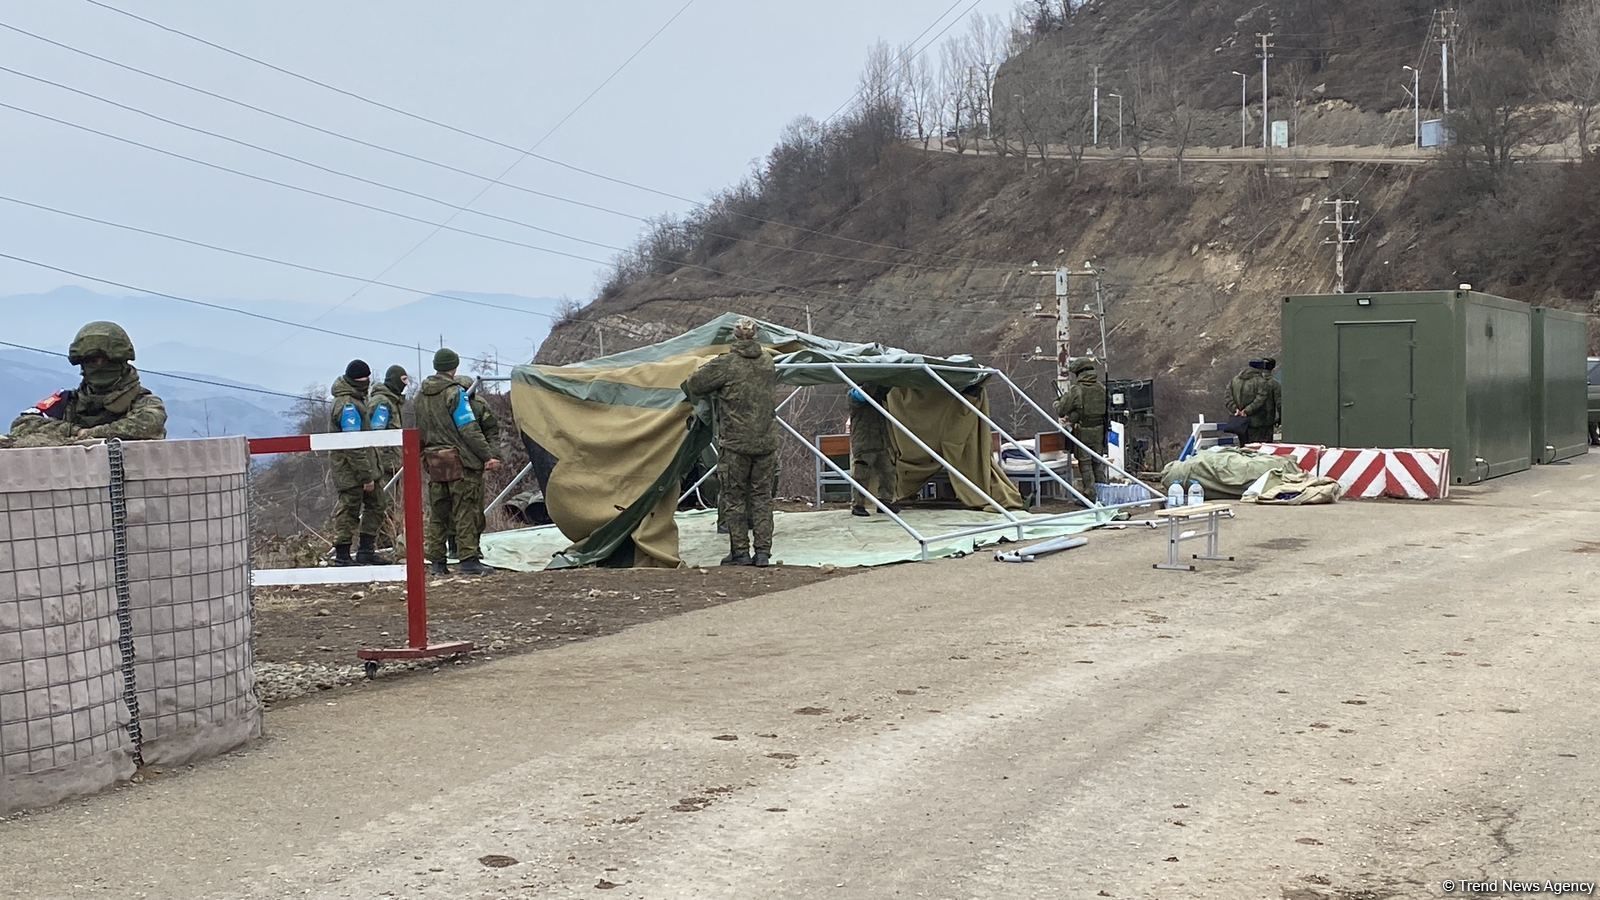 Peacekeepers changing place of their tents on area of peaceful protests near Azerbaijan's Shusha [PHOTO/VIDEO]